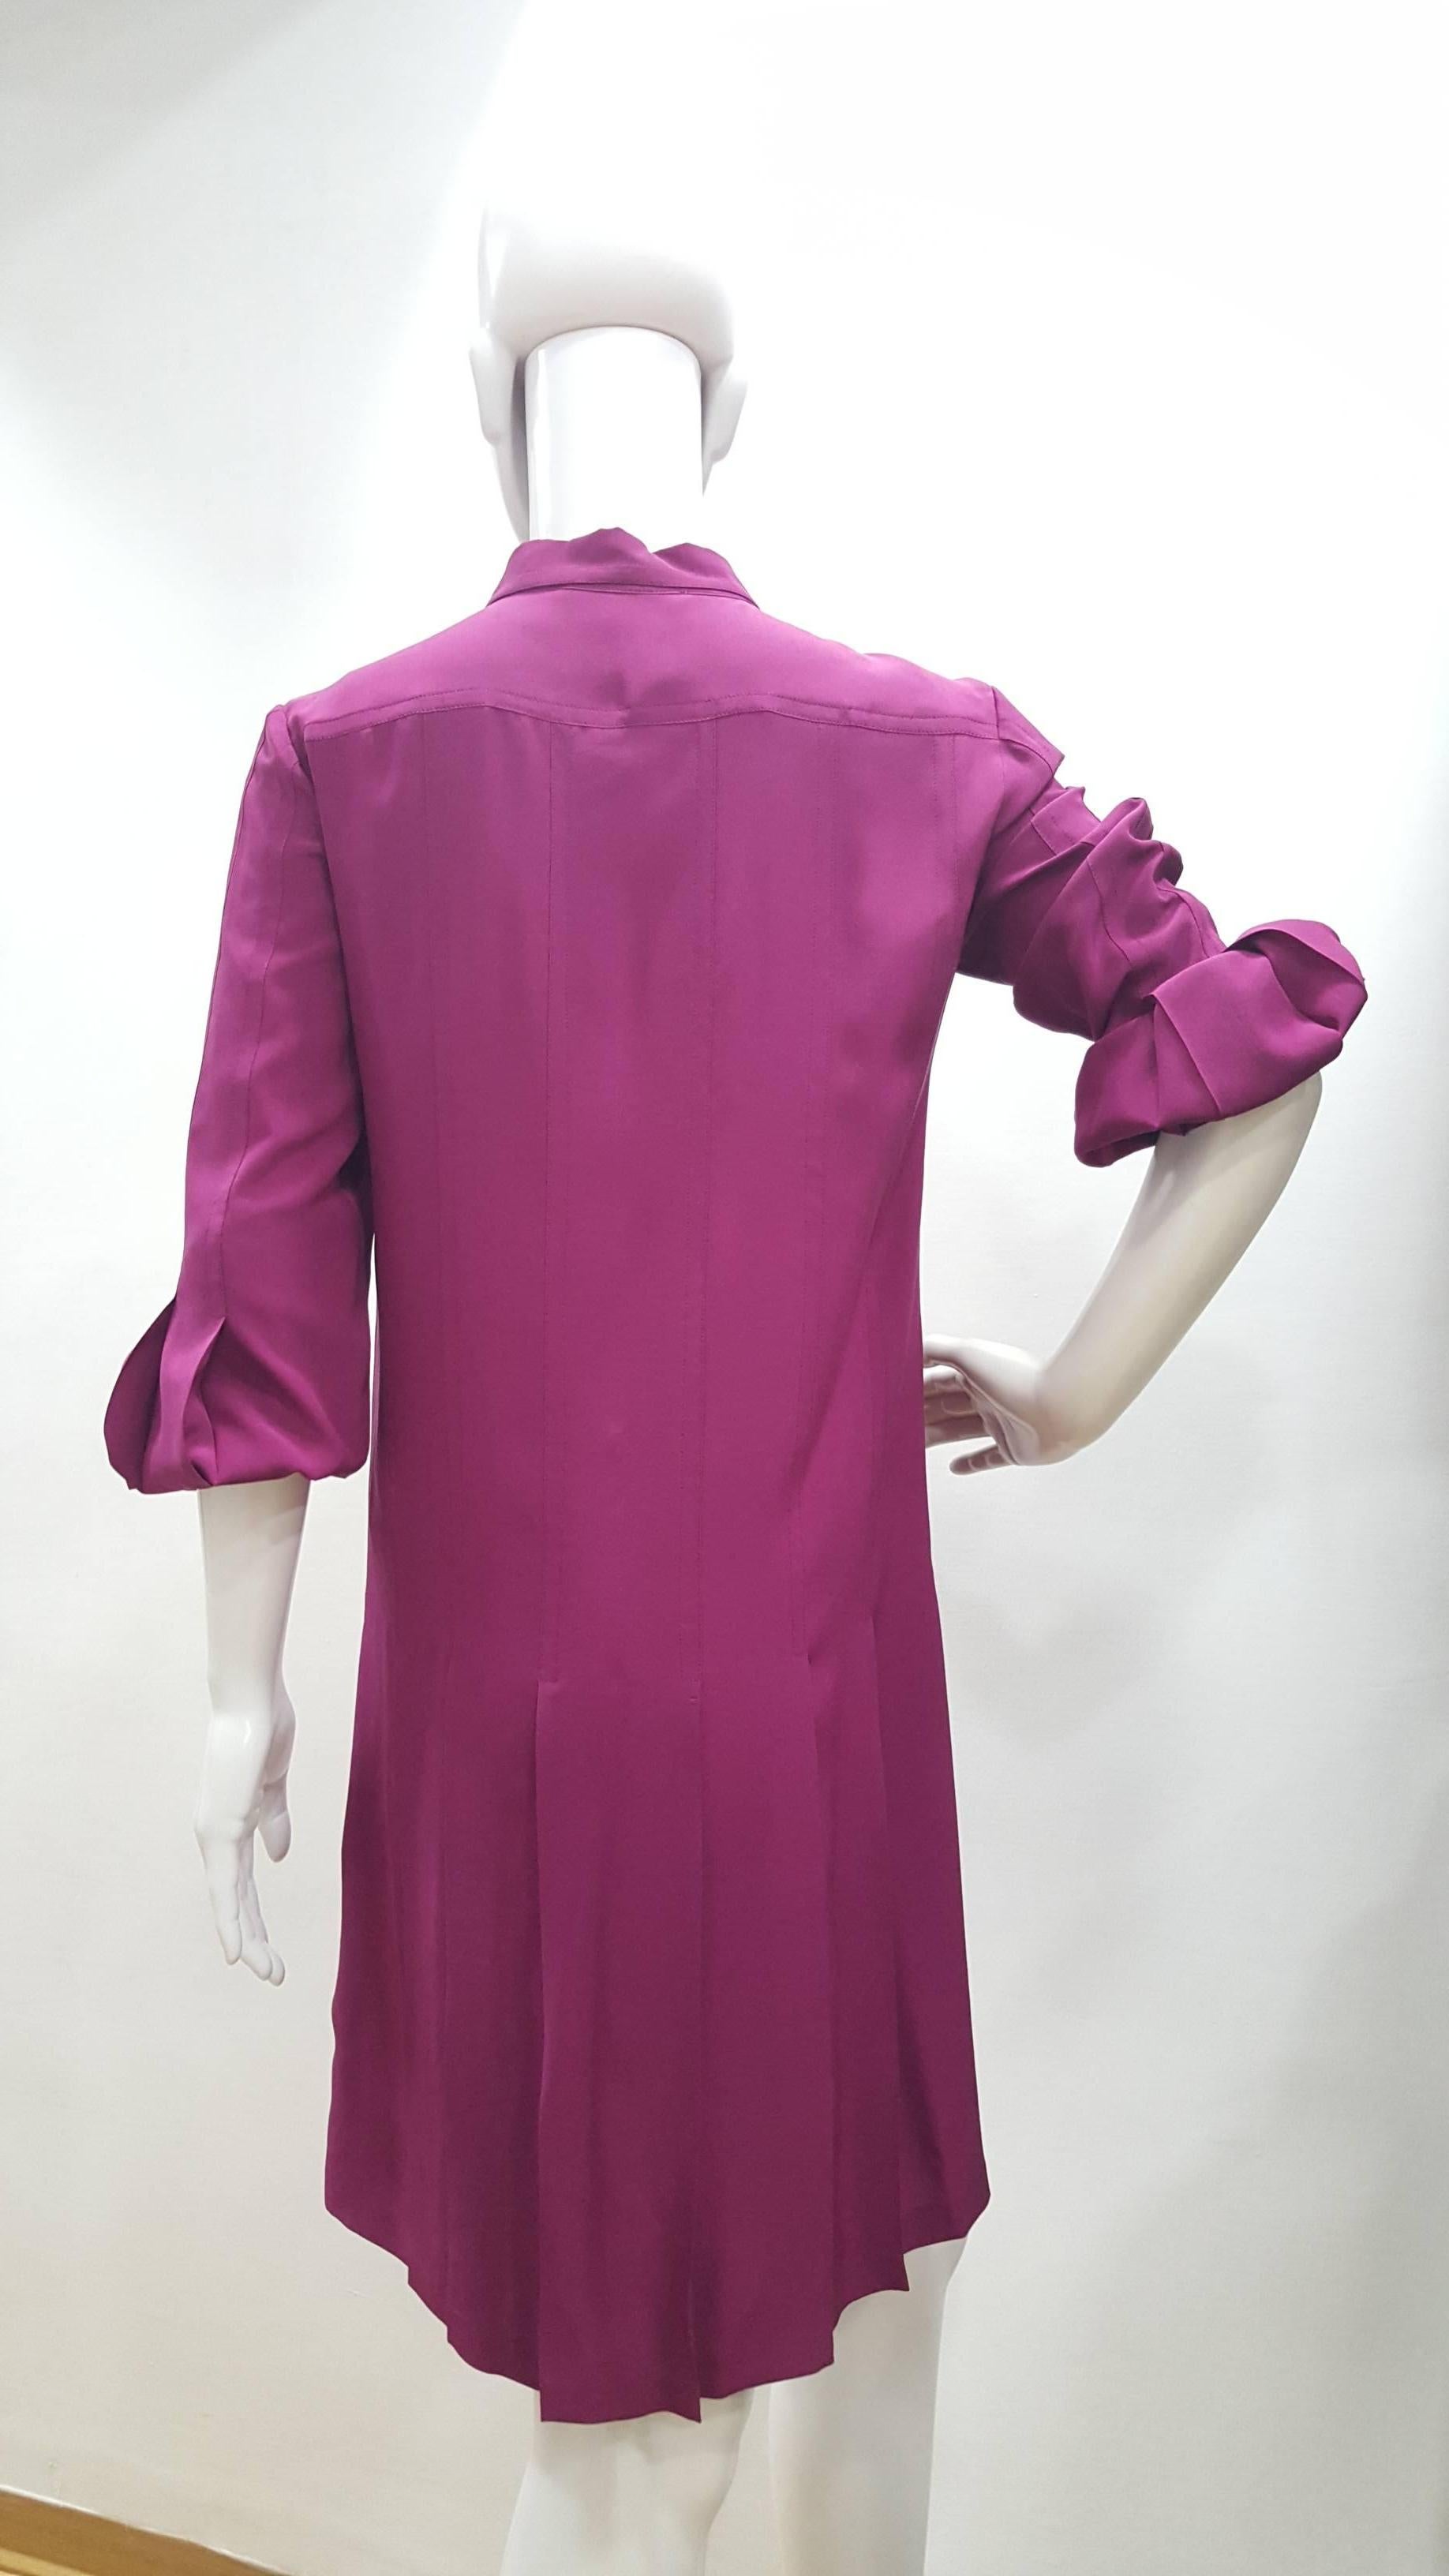 1980s Gucci Purple Dress by Alessandra Facchinetti with gold bottons